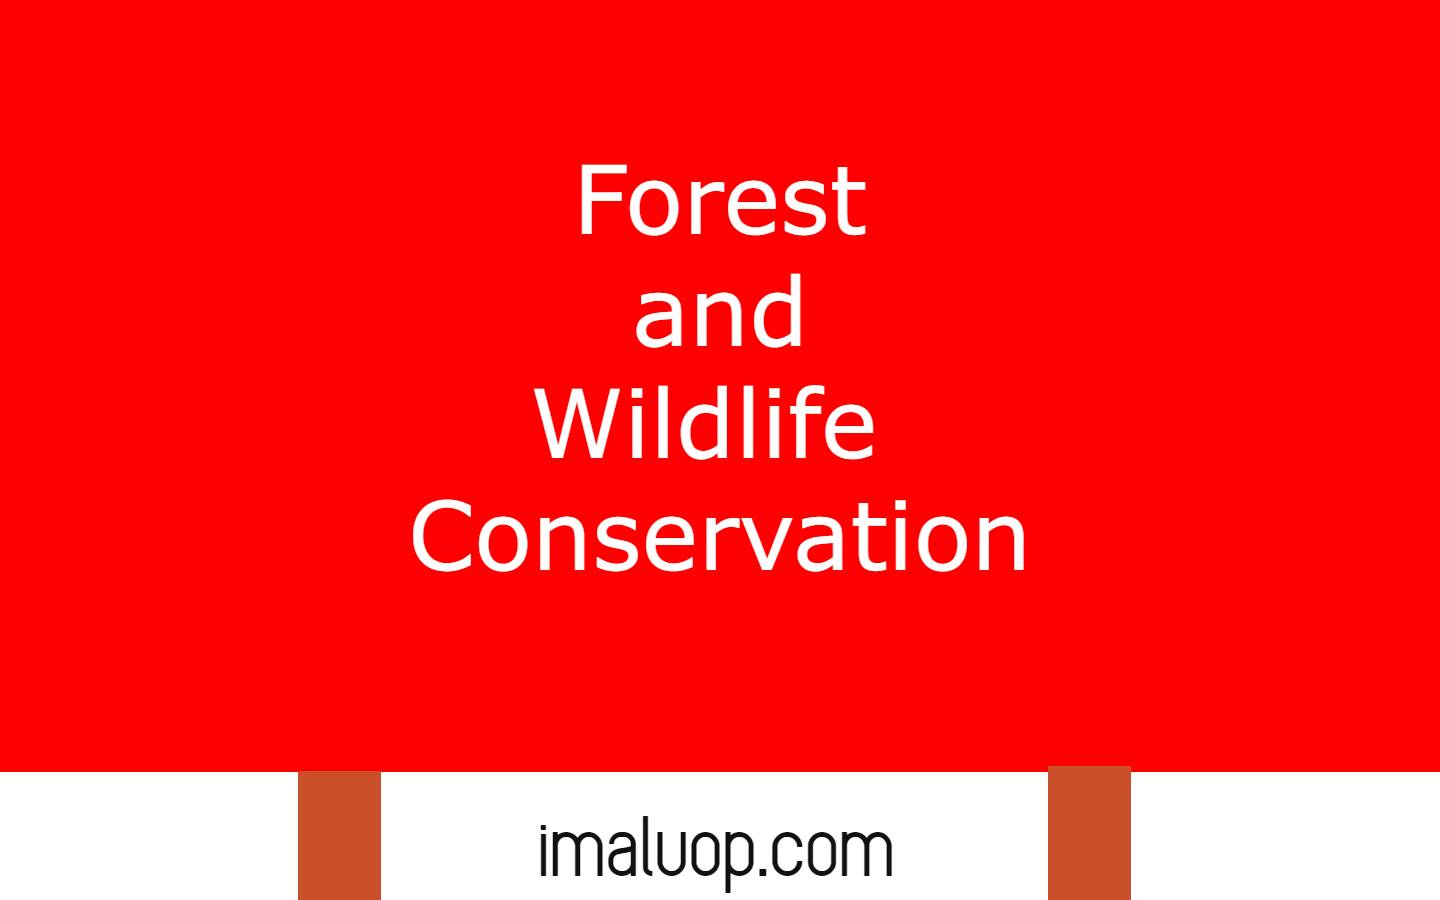 Forest and Wildlife Conservation